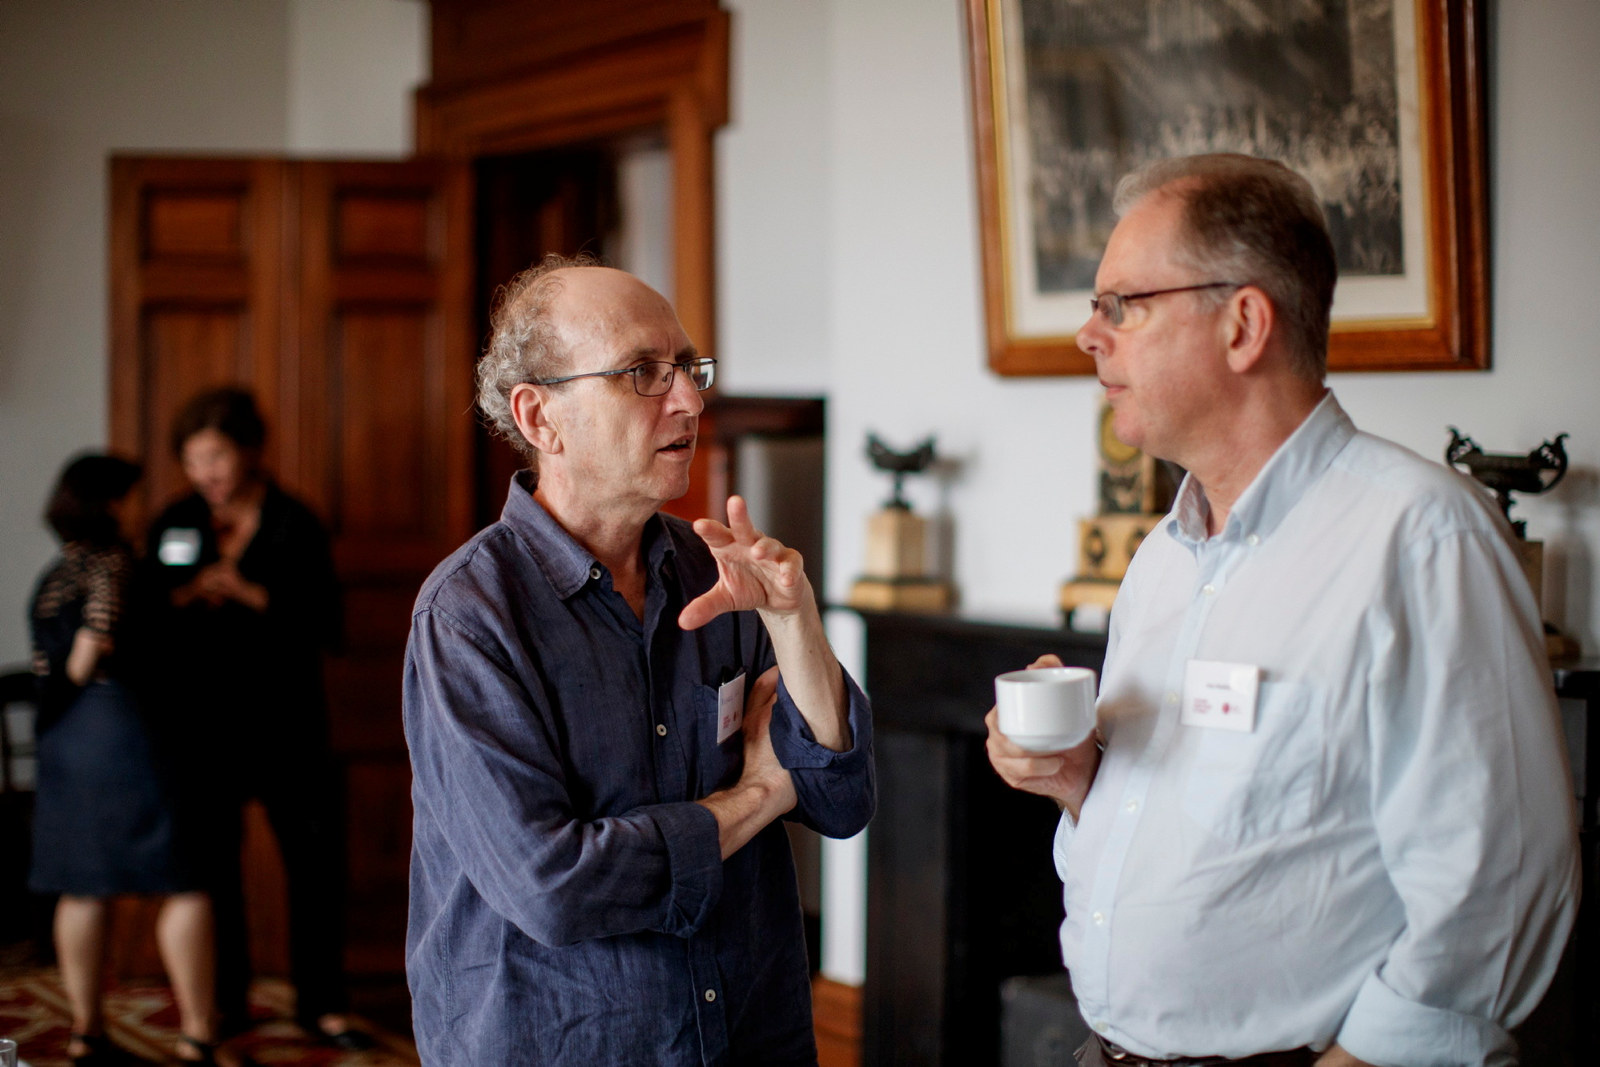 Michael Lea, former curator of music at the Powerhouse Museum, and Dr Alan Maddox, Senior Lecturer in Musicology at the Sydney Conservatorium of Music, University of Sydney